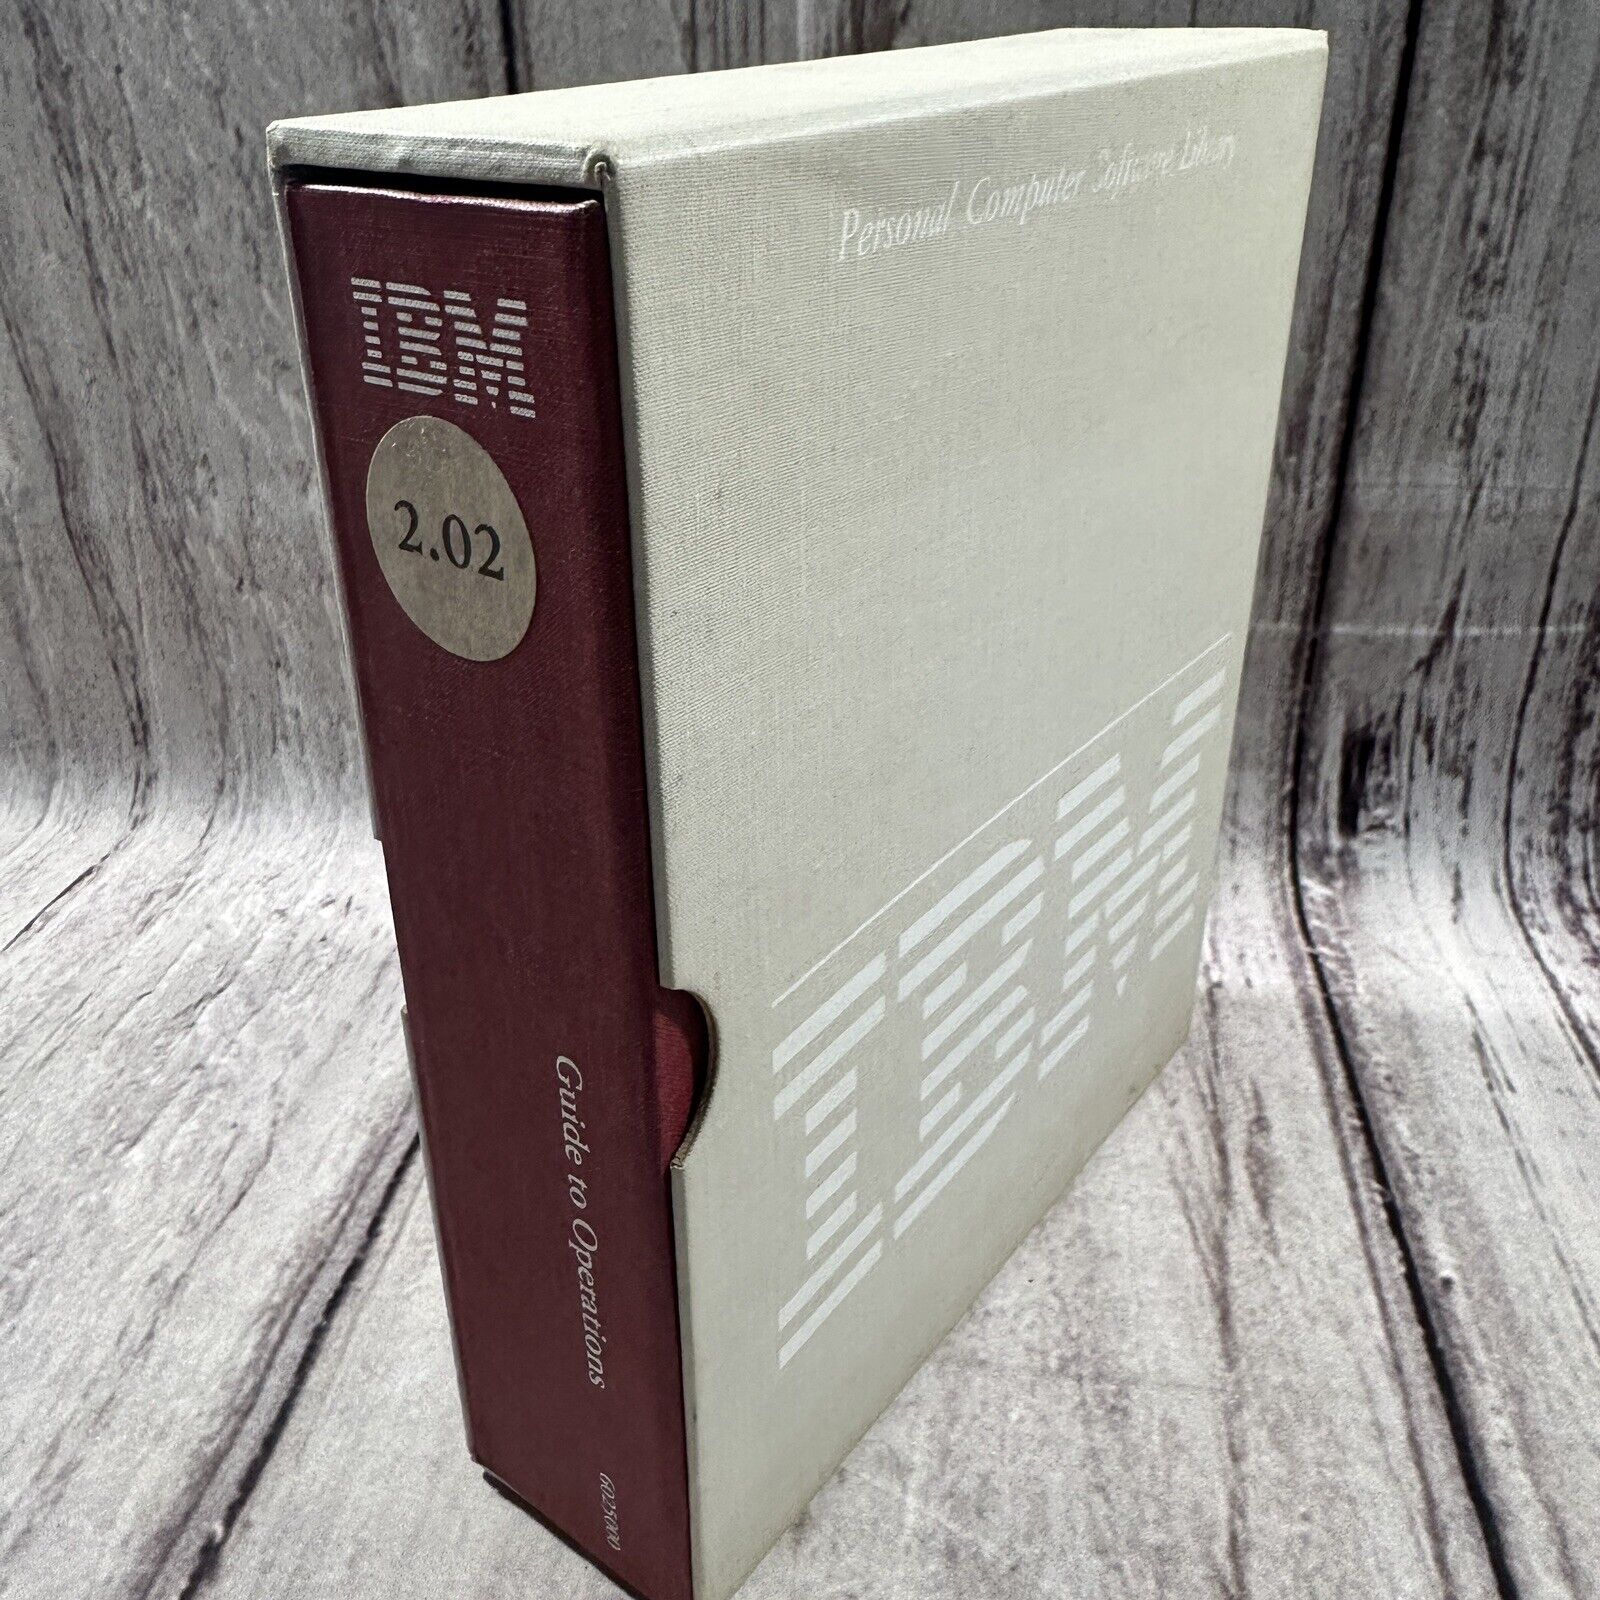 Vintage IBM Computer Software Guide to Operations version 2.02